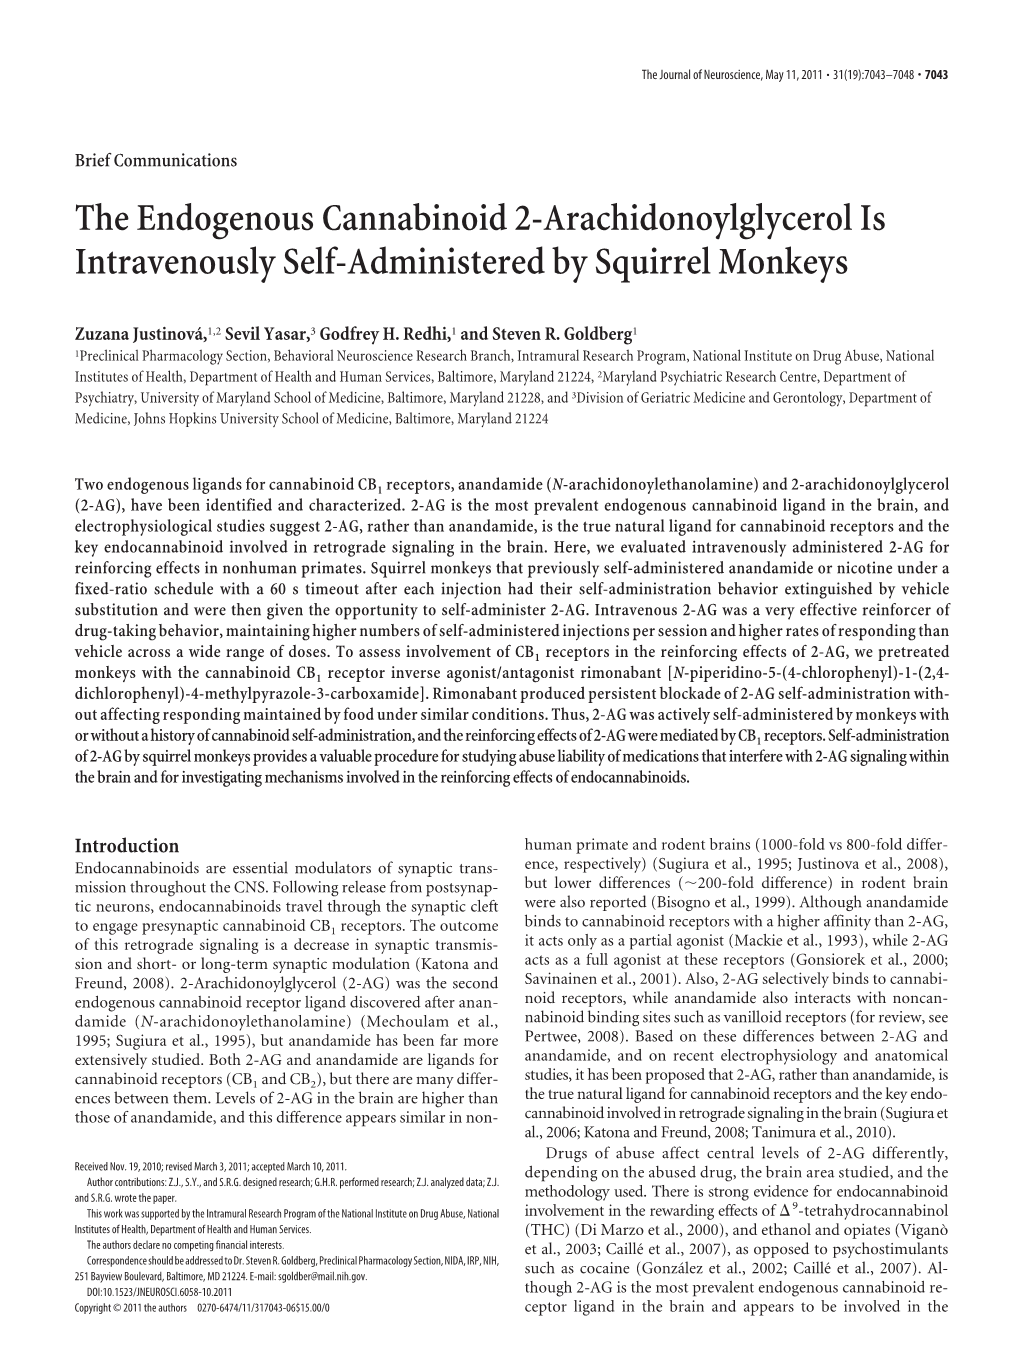 The Endogenous Cannabinoid 2-Arachidonoylglycerol Is Intravenously Self-Administered by Squirrel Monkeys